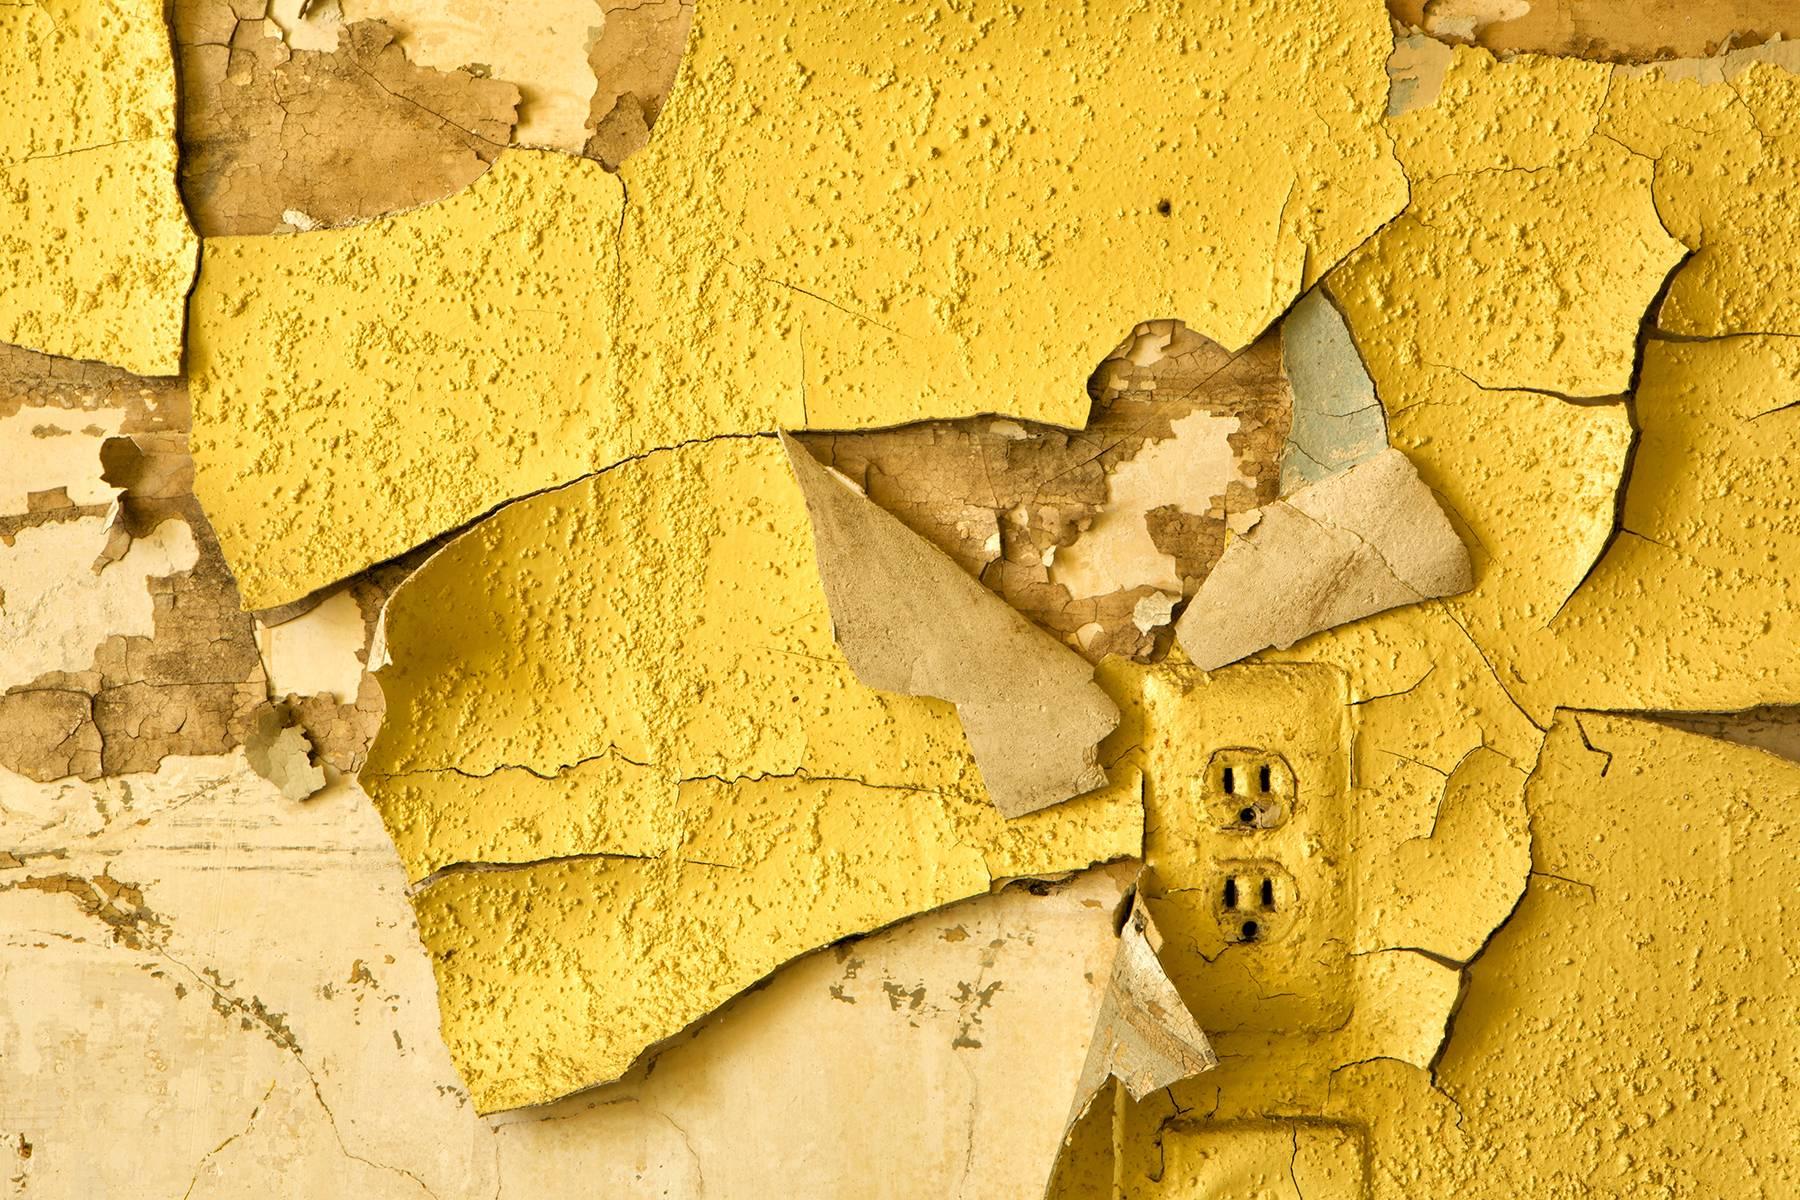 "Waning", abandoned, peeling paint, electrical, outlet, yellow, color photograph - Photograph by Rebecca Skinner